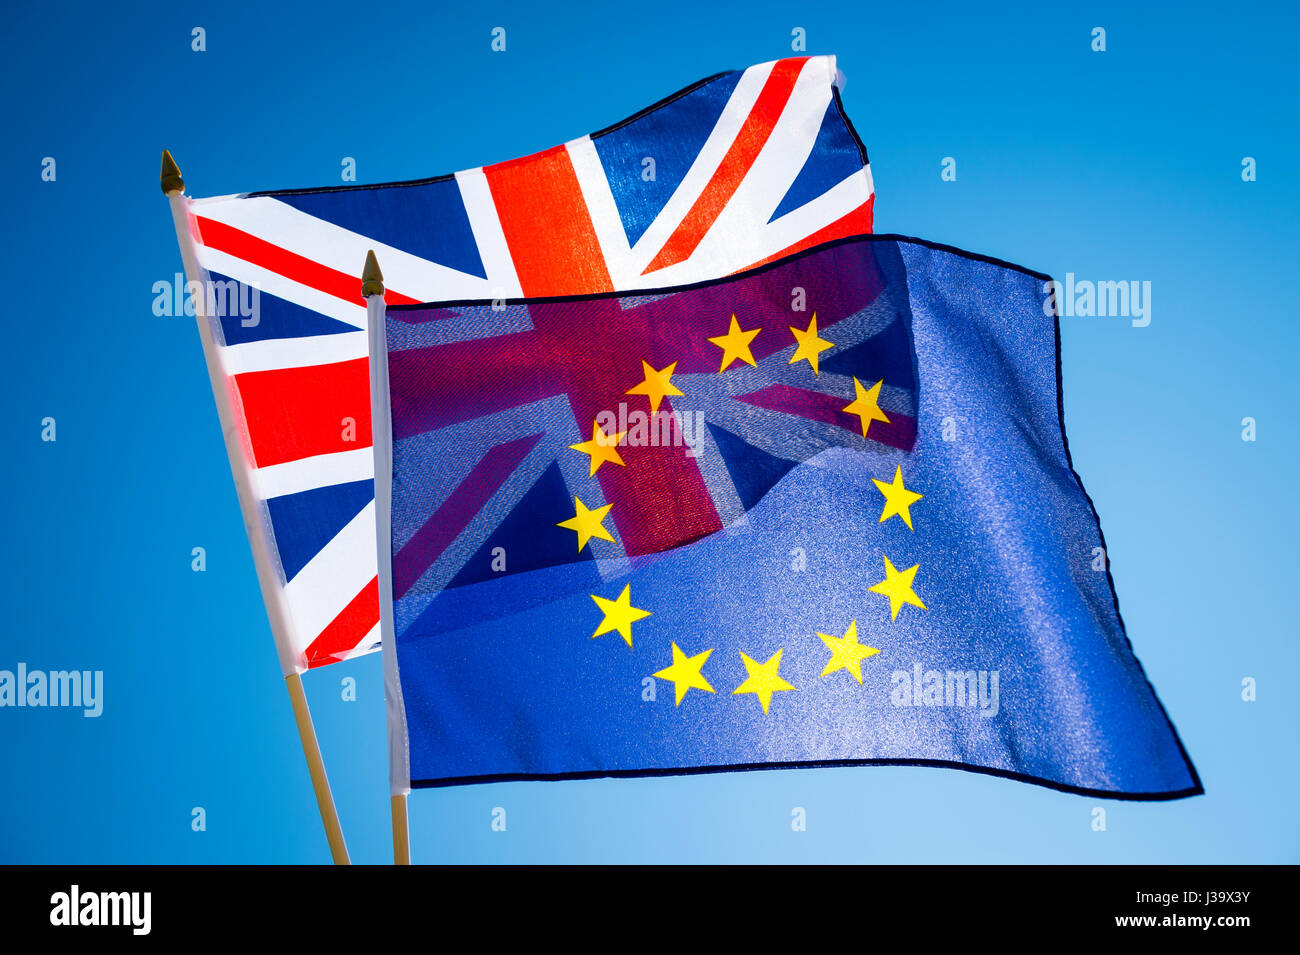 EU European Union and Scottish flags flying together in Brexit solidarity in bright blue sky Stock Photo